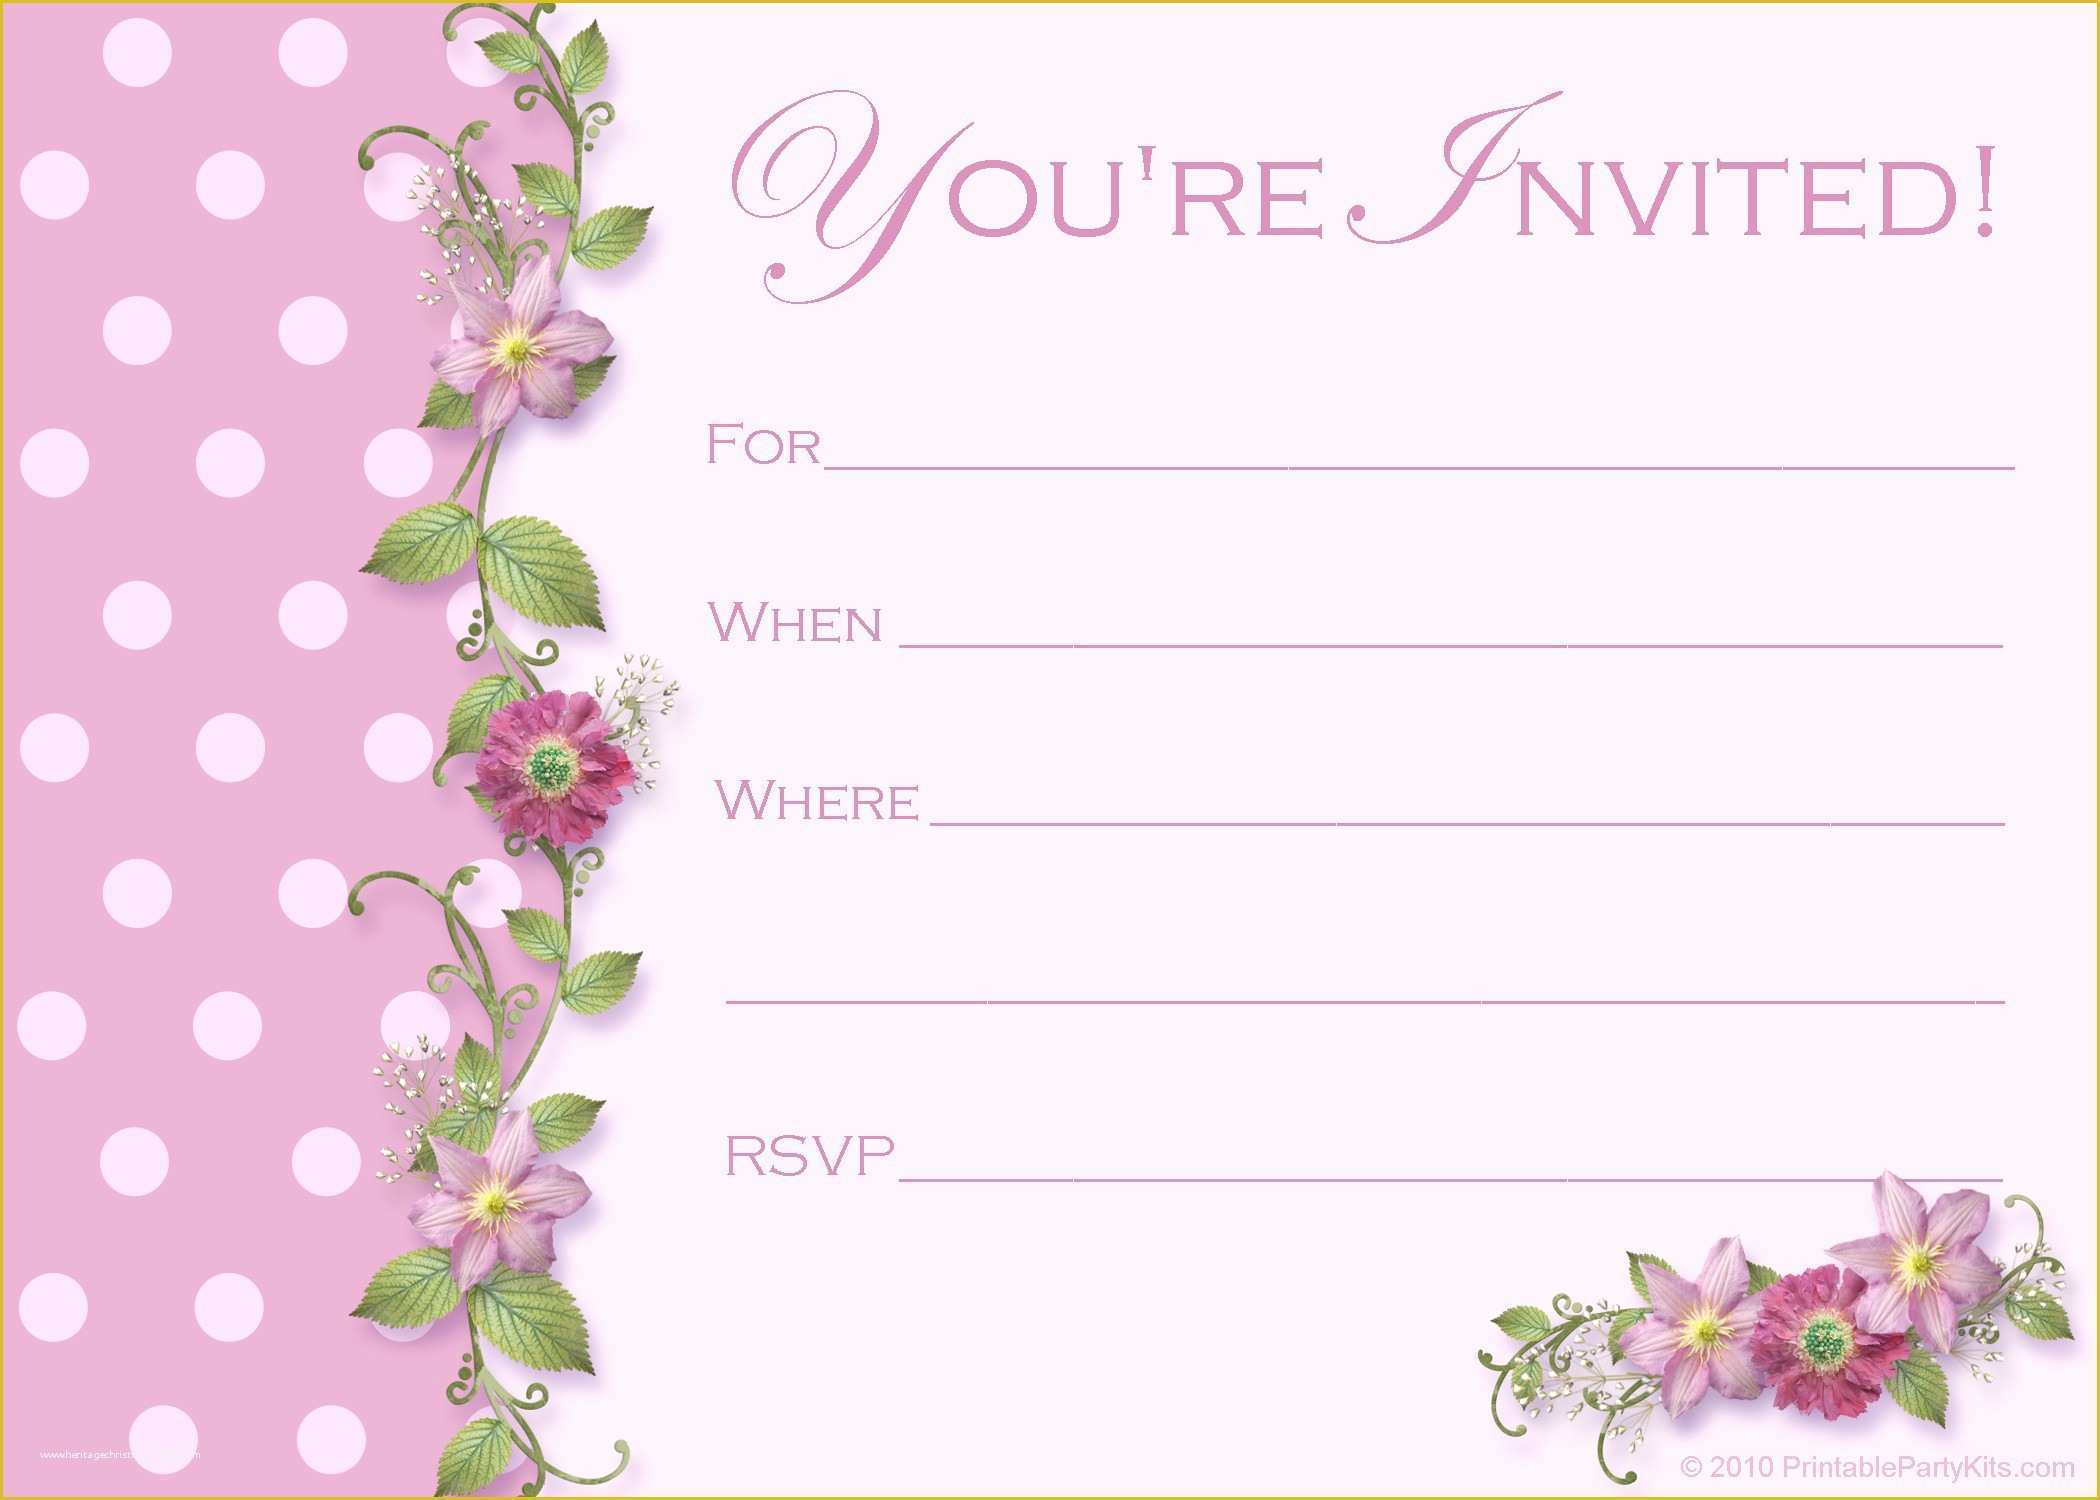 dinner-party-invitation-templates-free-download-of-free-printable-party